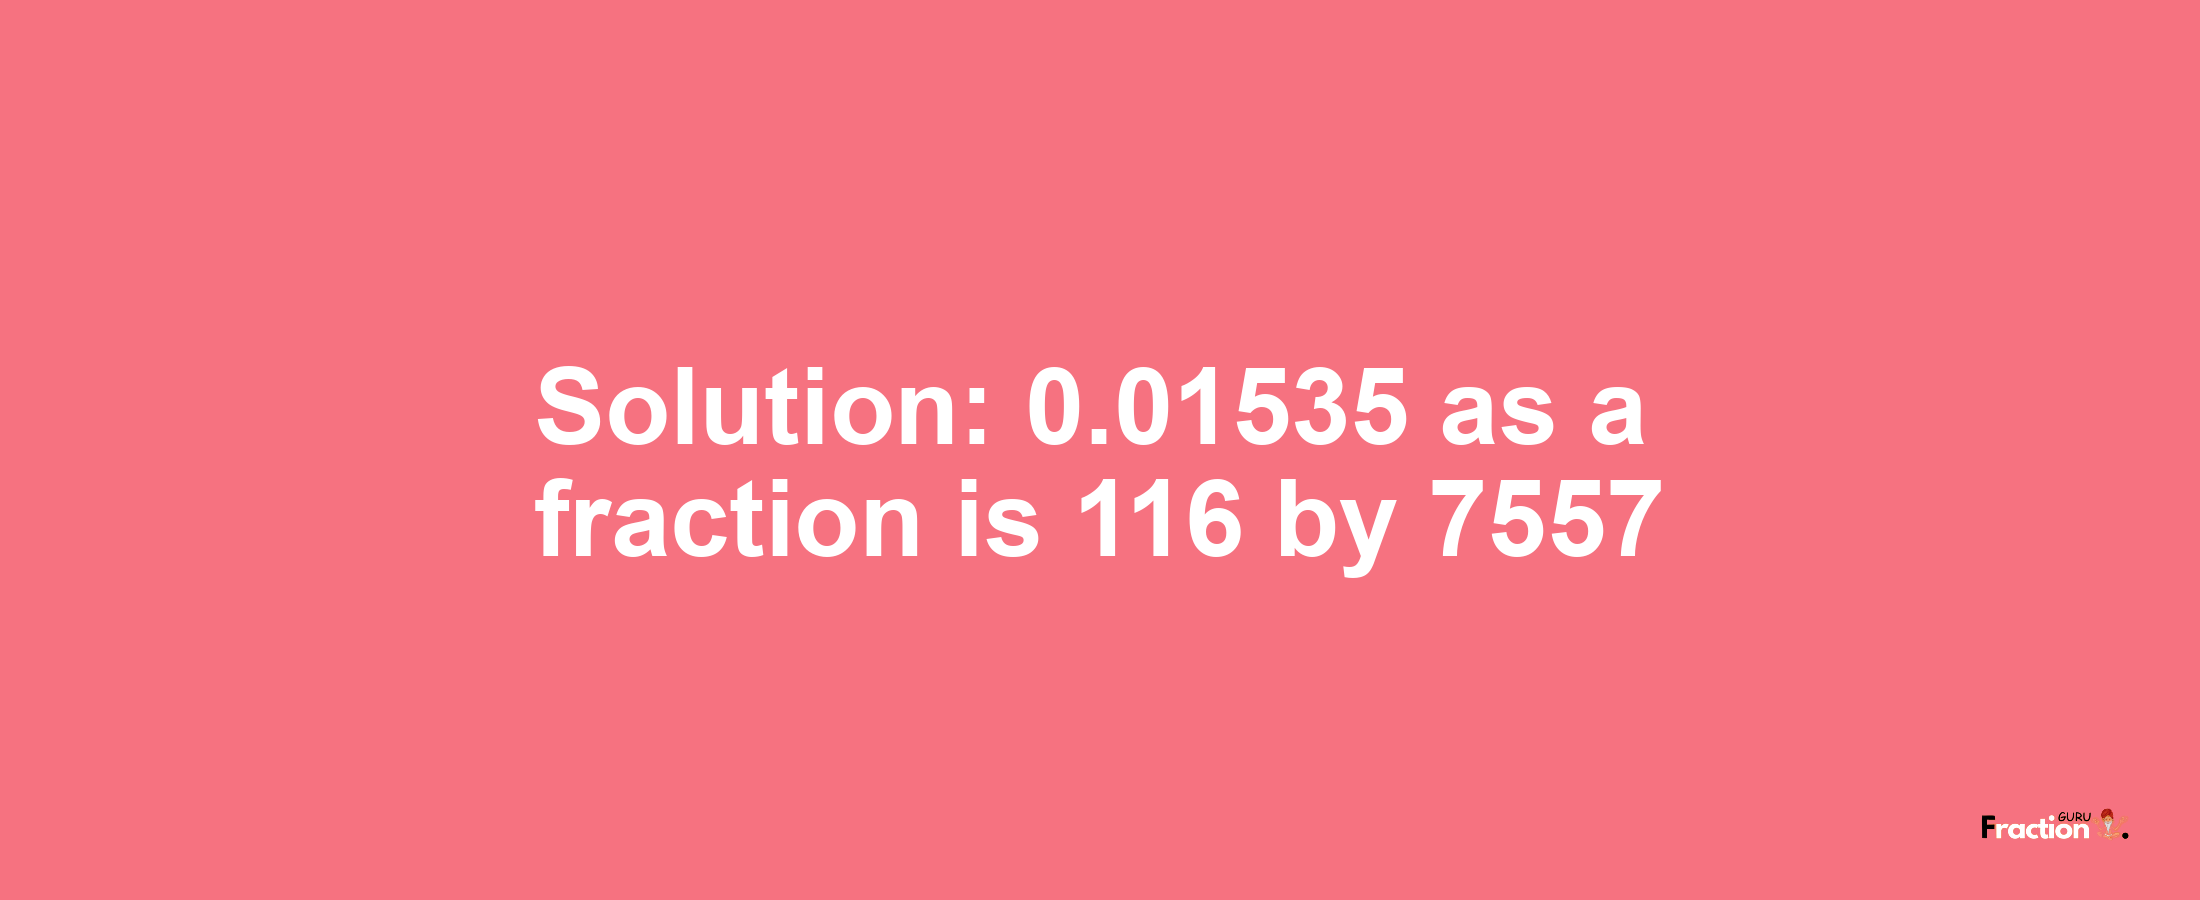 Solution:0.01535 as a fraction is 116/7557